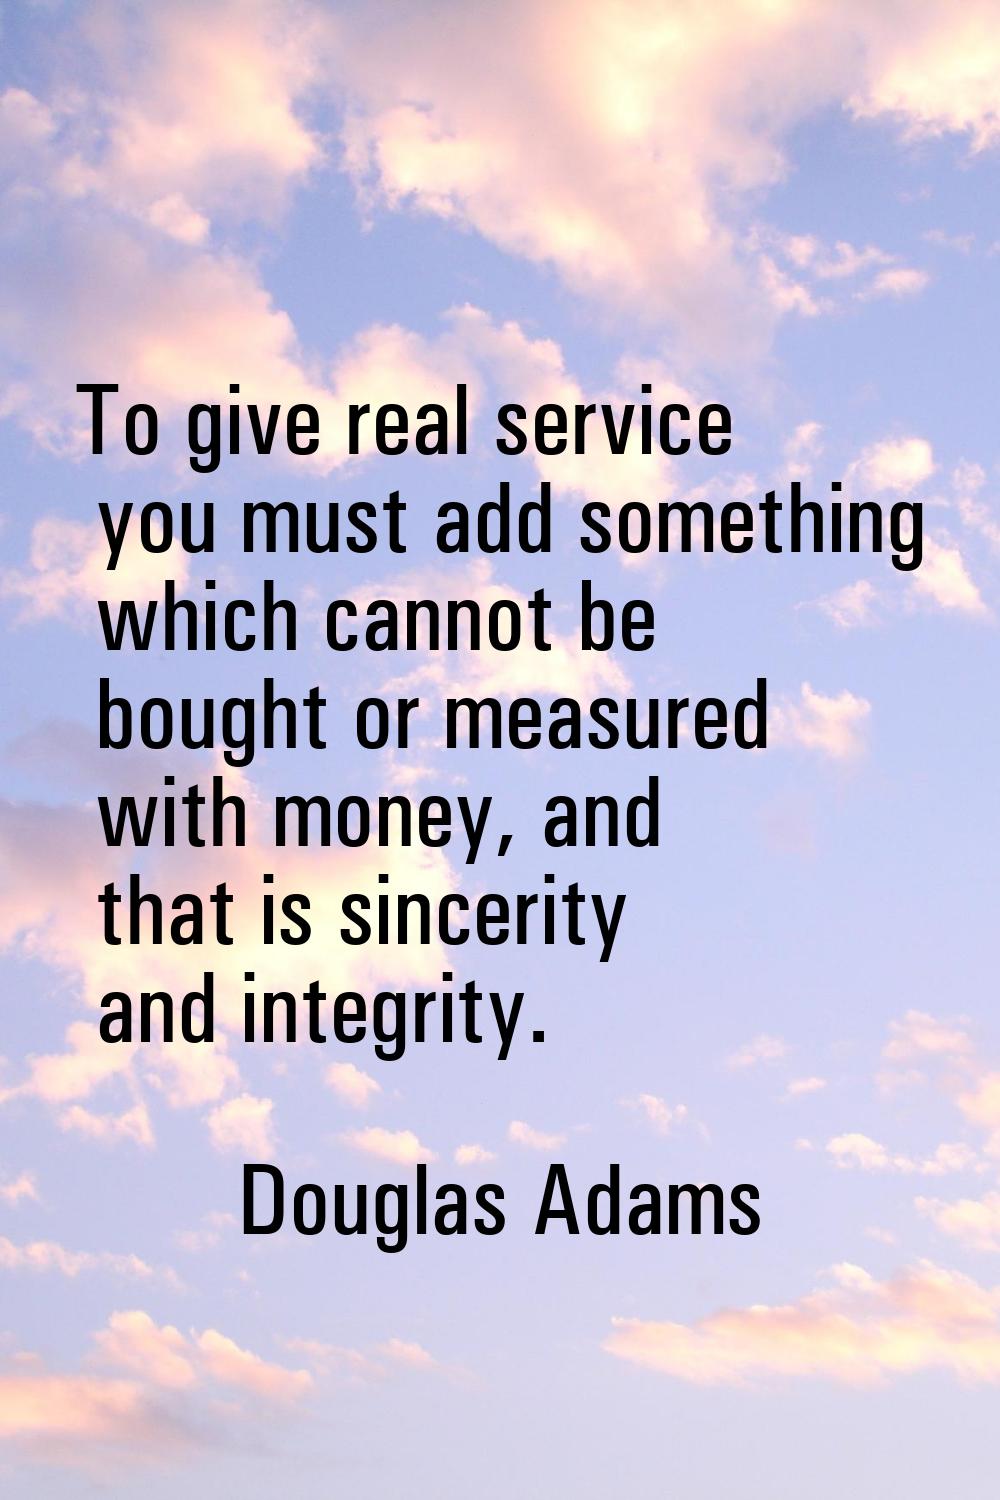 To give real service you must add something which cannot be bought or measured with money, and that